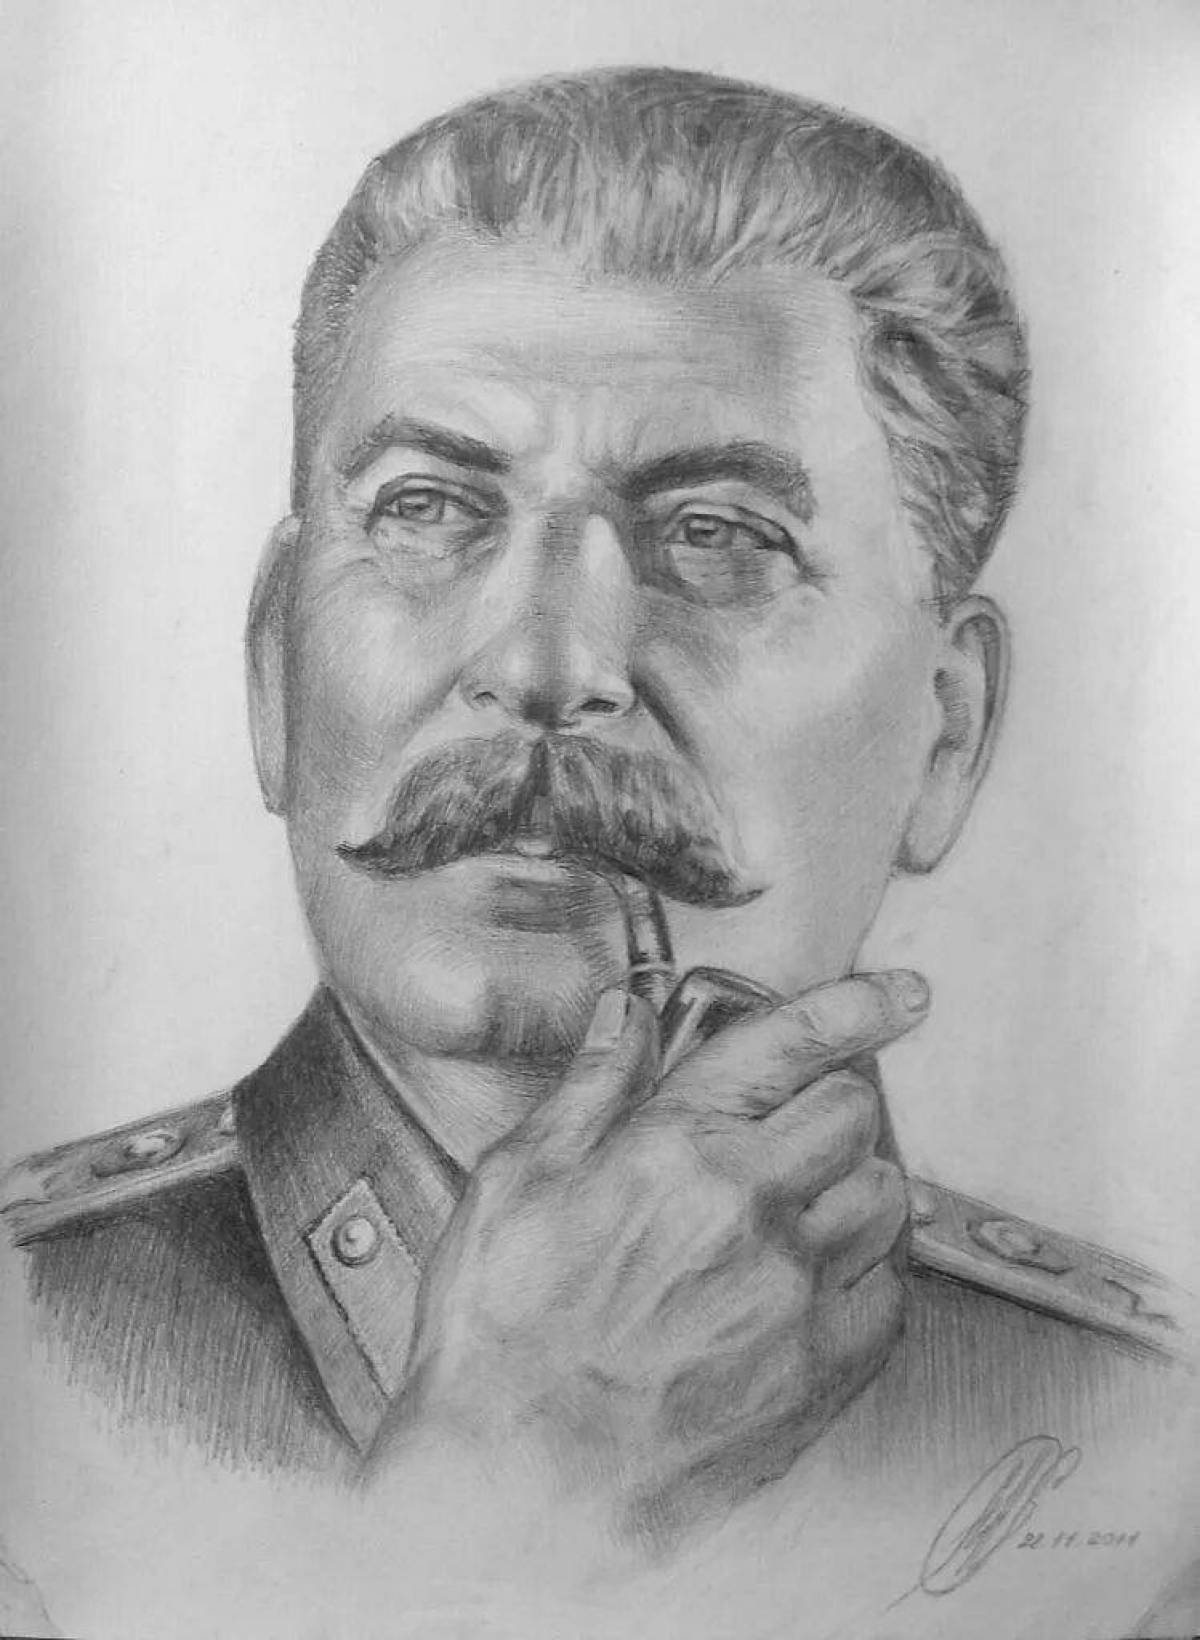 Stalin's alluring coloring